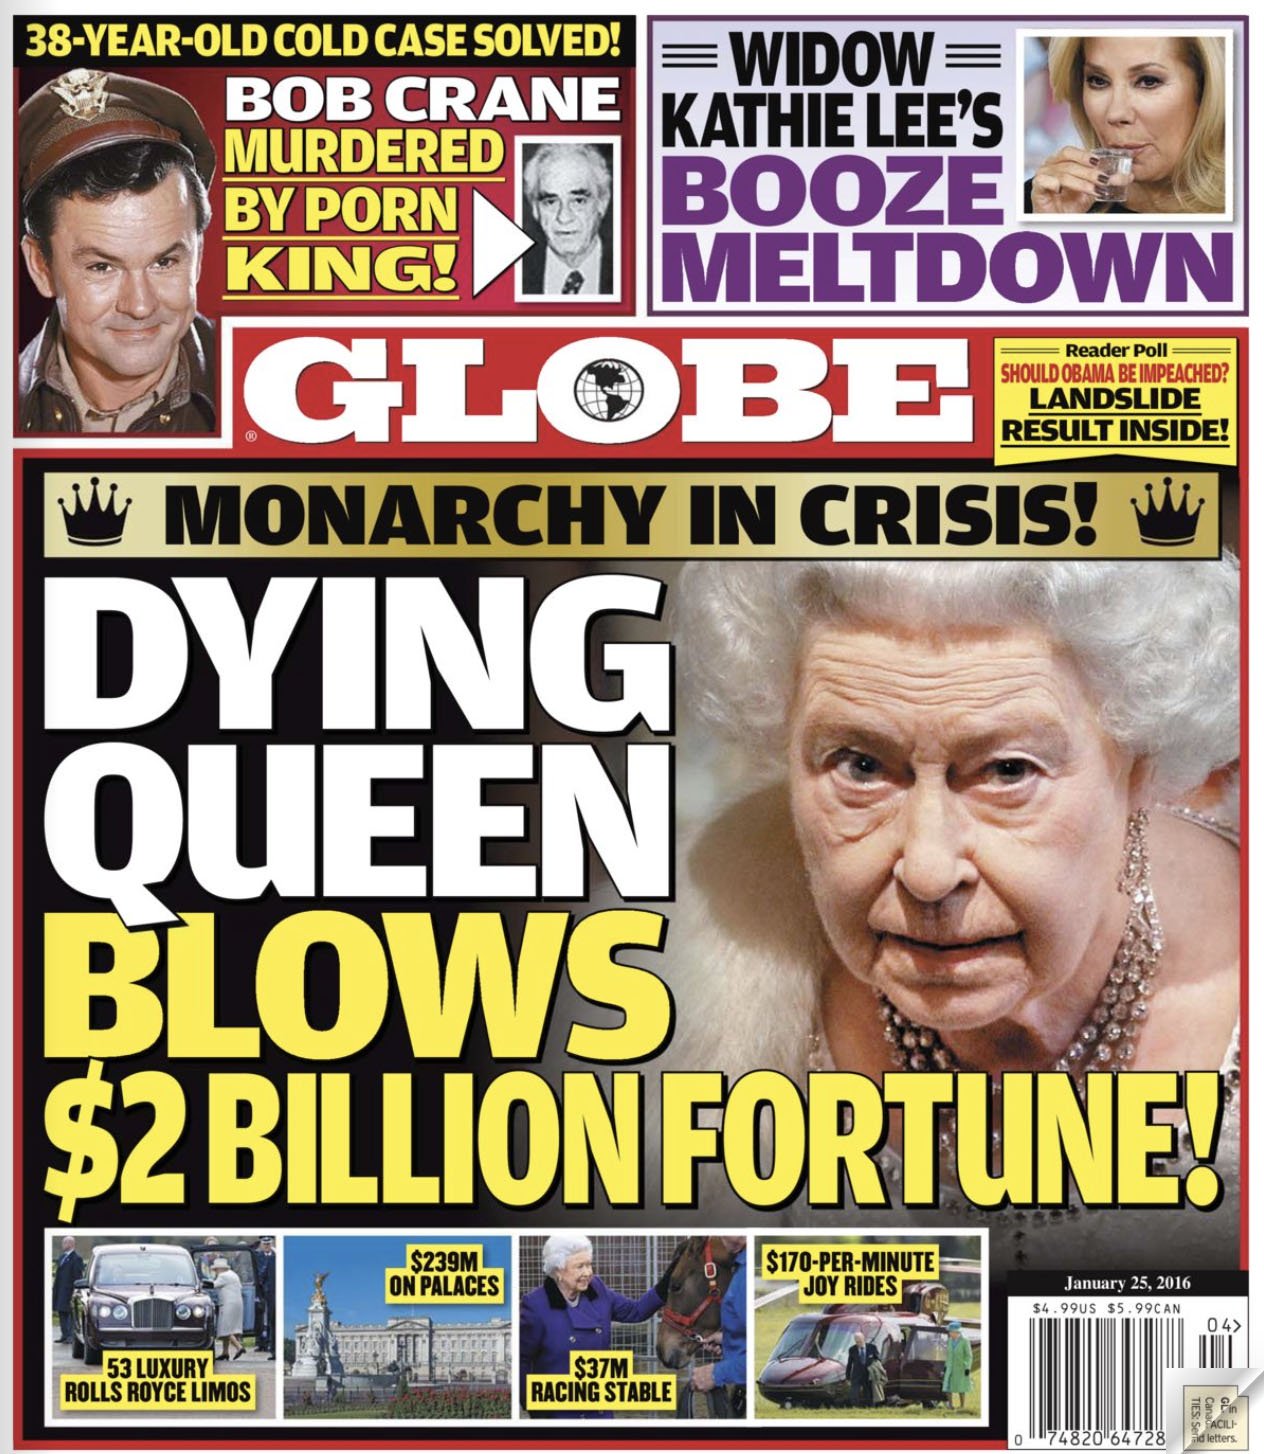 Queen Elizabeth on the cover of the Globe in January 2016